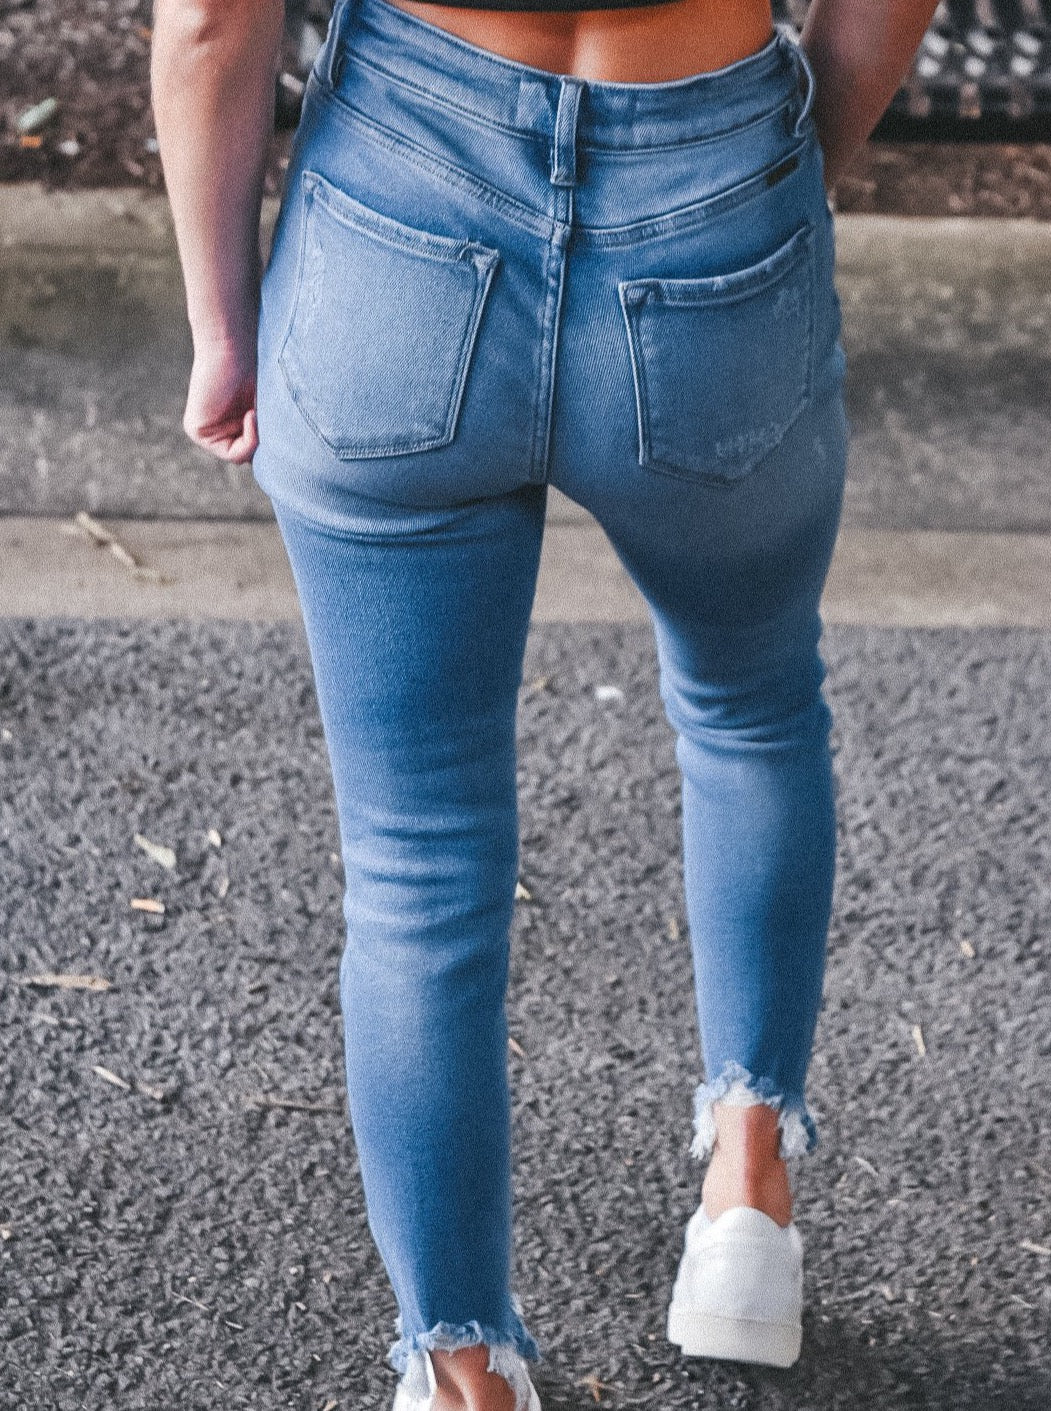 High Rise Skinny Ankle Jeans